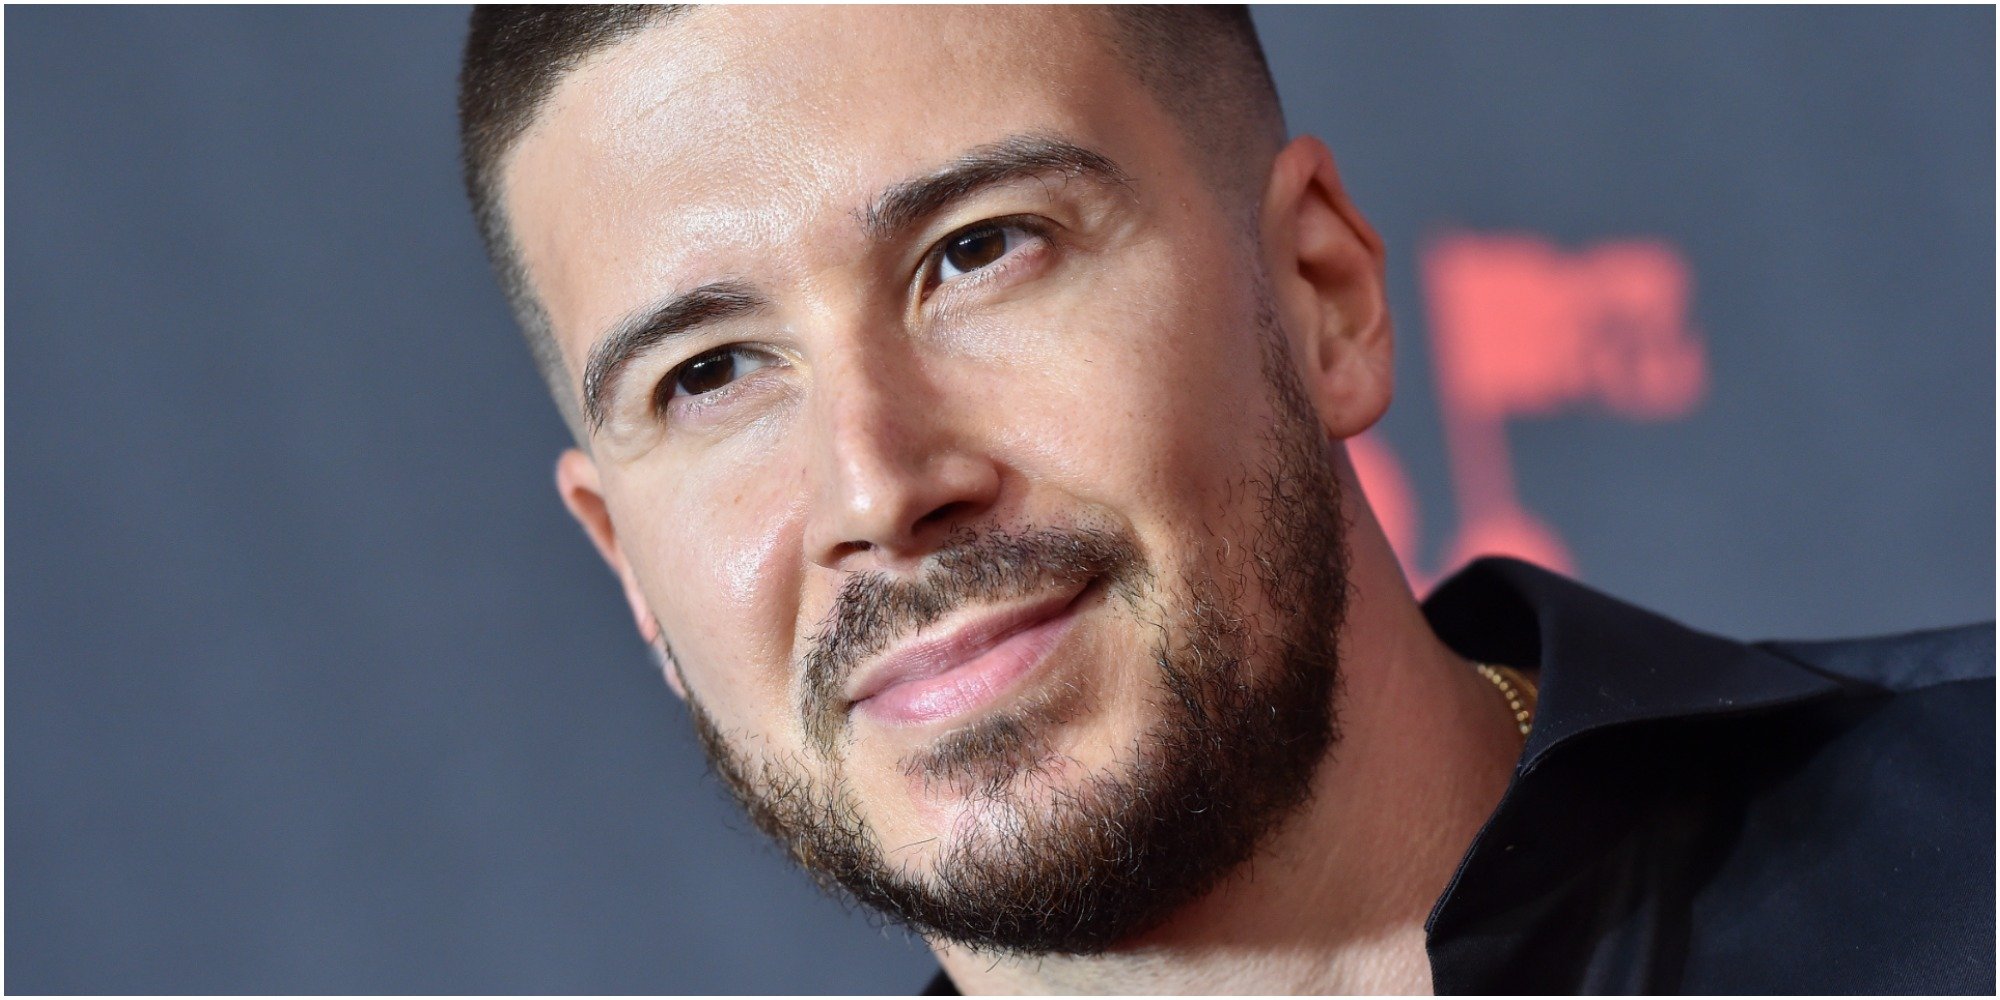 Vinny Guadagnino on the red carpet at the MTV awards in Sept. 2021.